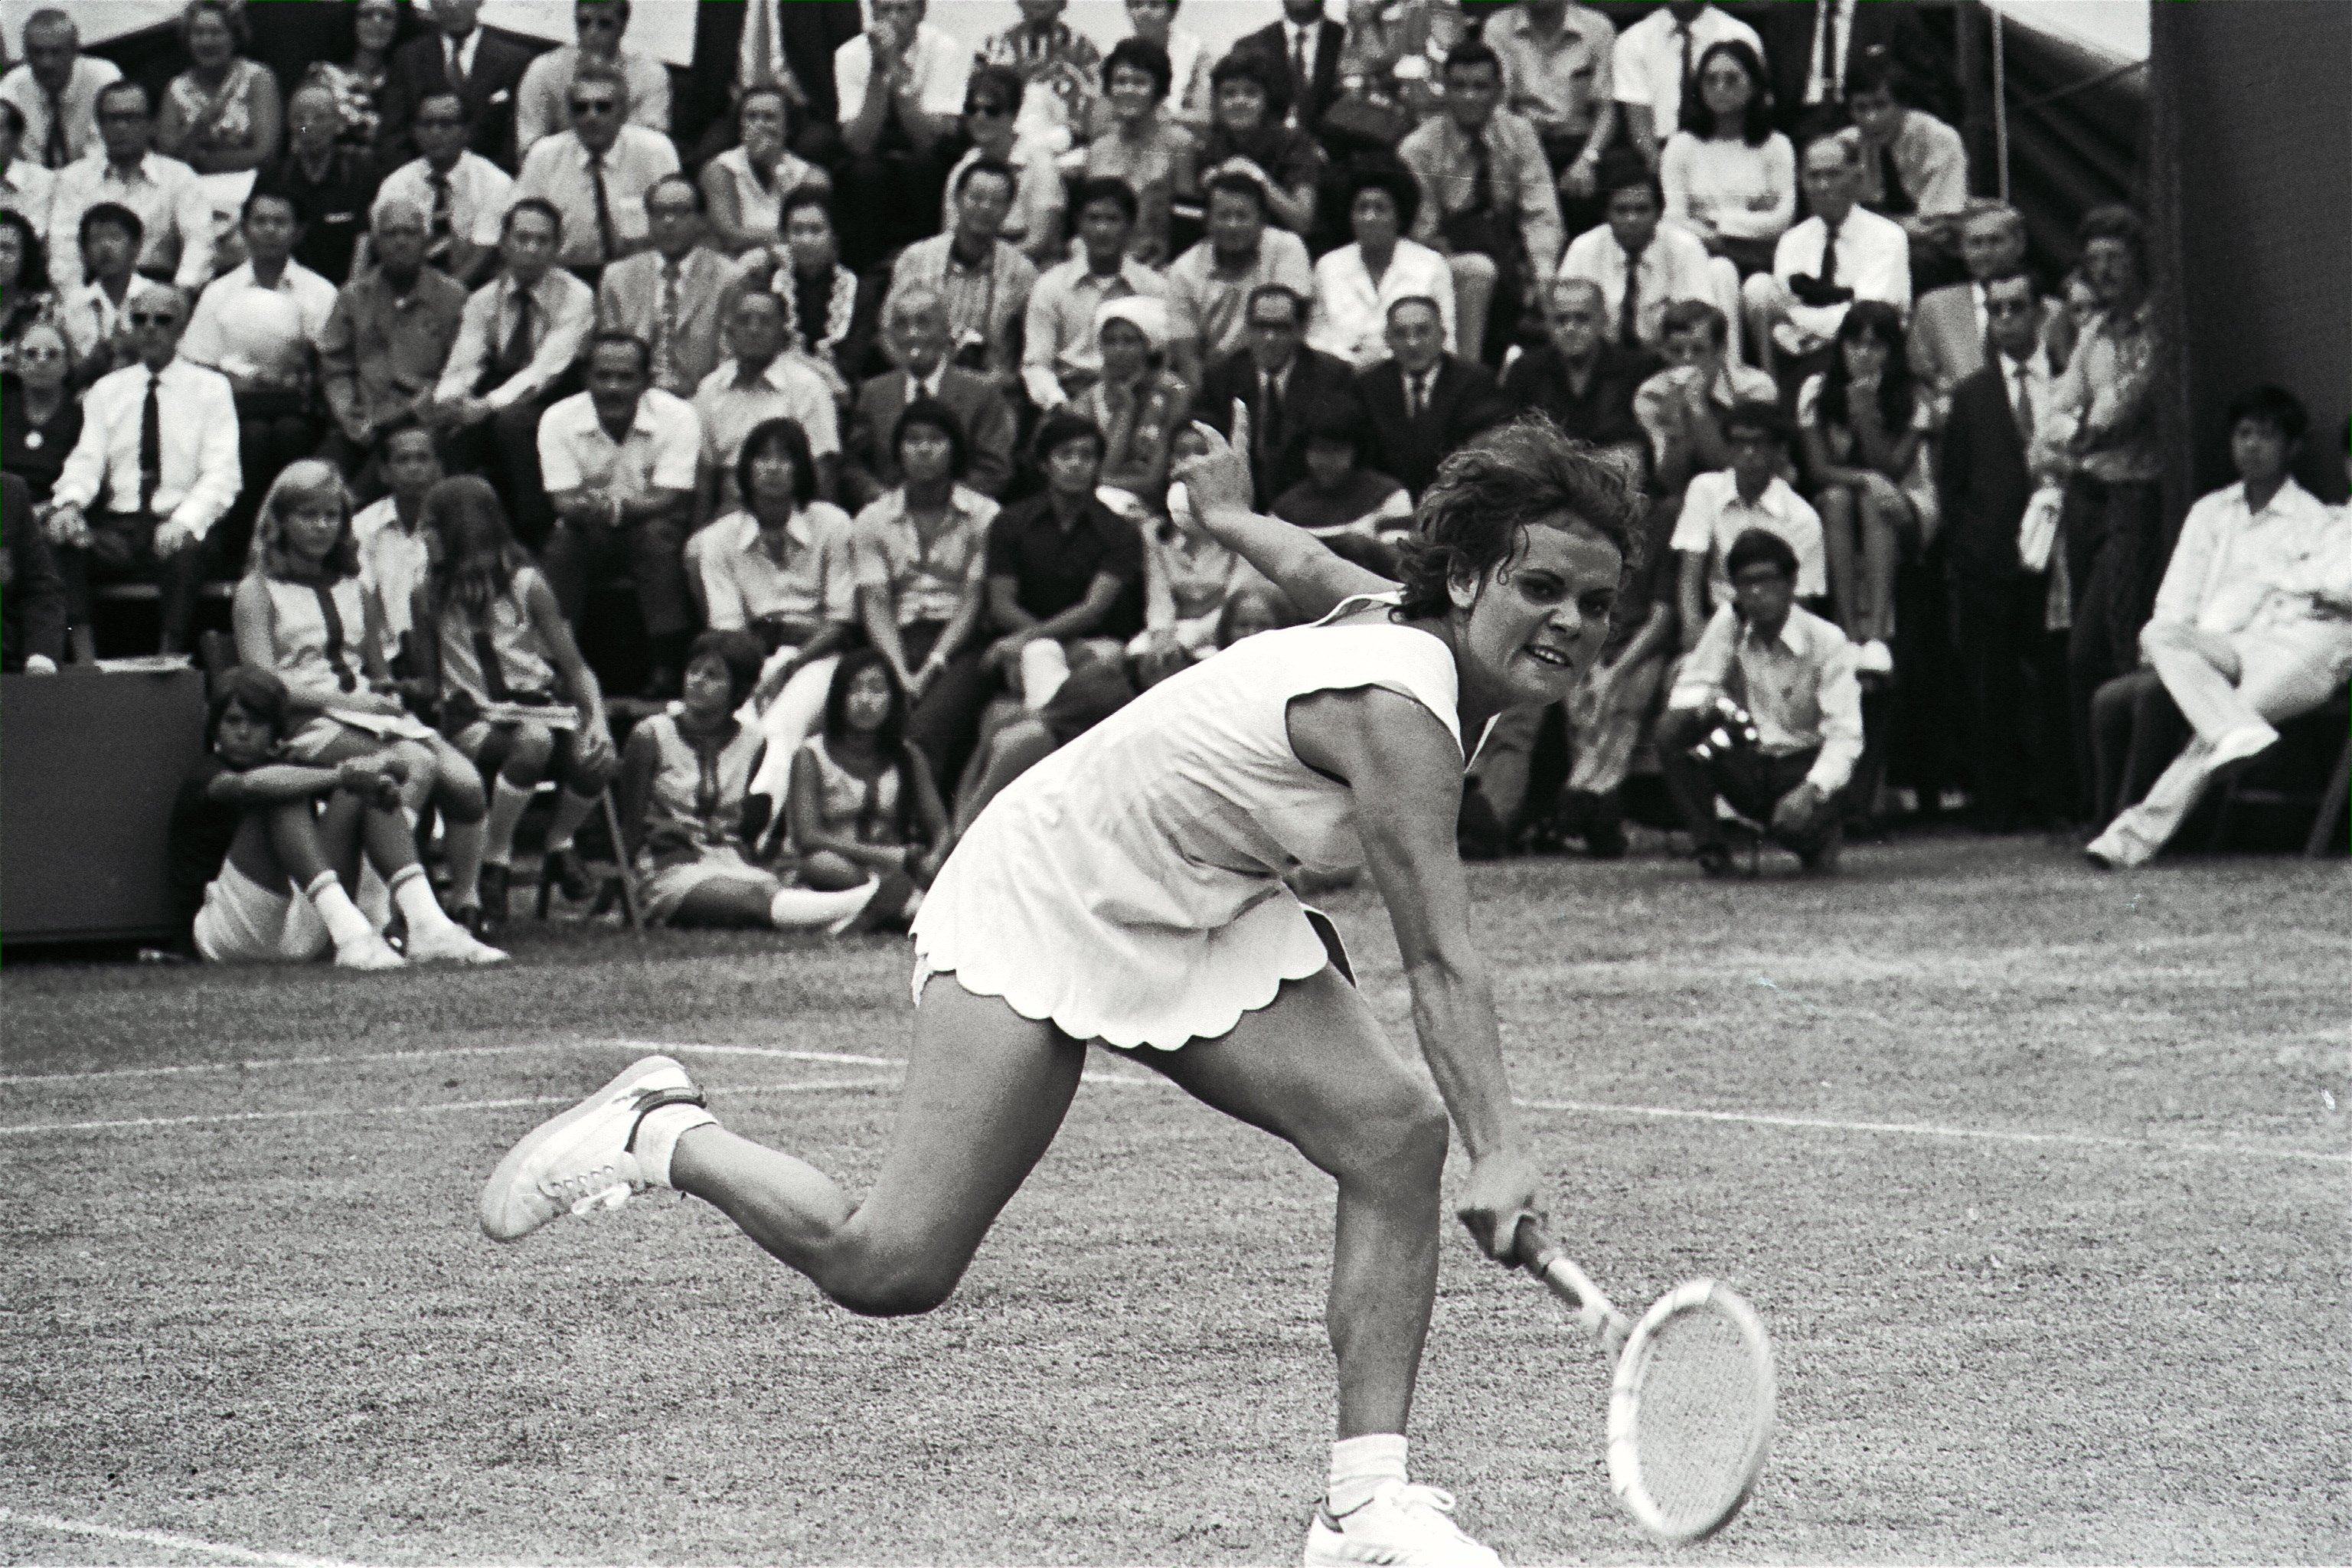 When Australian champion Evonne Goolagong played in Kong after her first Wimbledon triumph | South China Morning Post